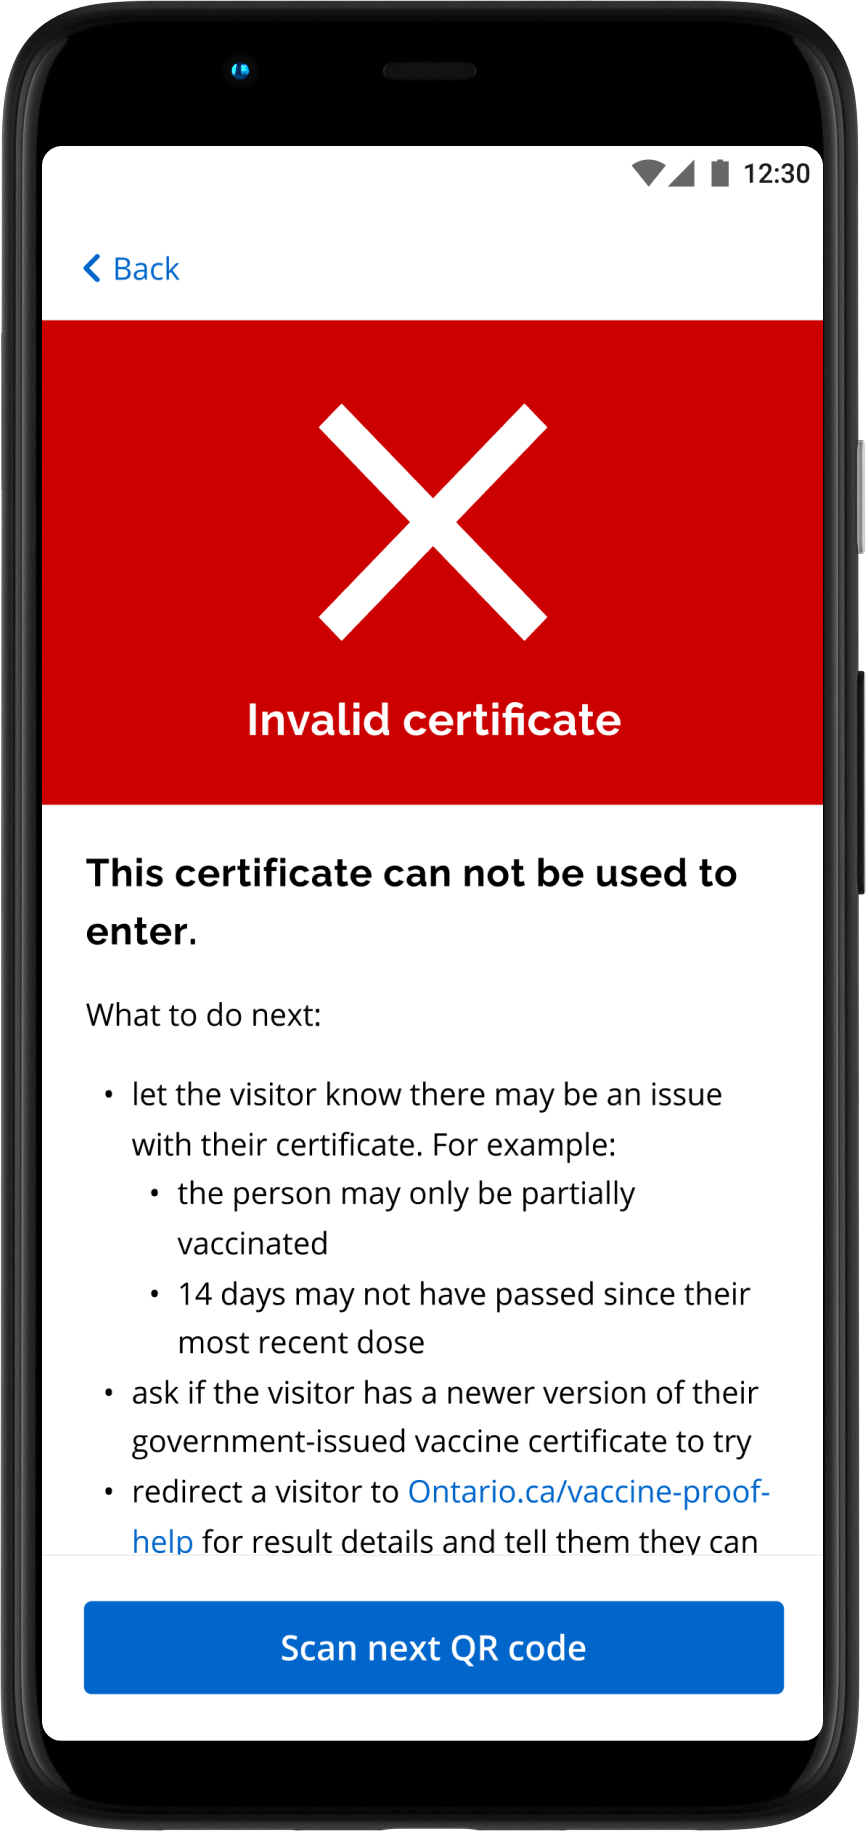 Red “X” screen may mean the visitor is not fully vaccinated, 14 days may have not passed since the visitor was fully vaccinated, or there is missing, invalid or incorrect information in the QR code.